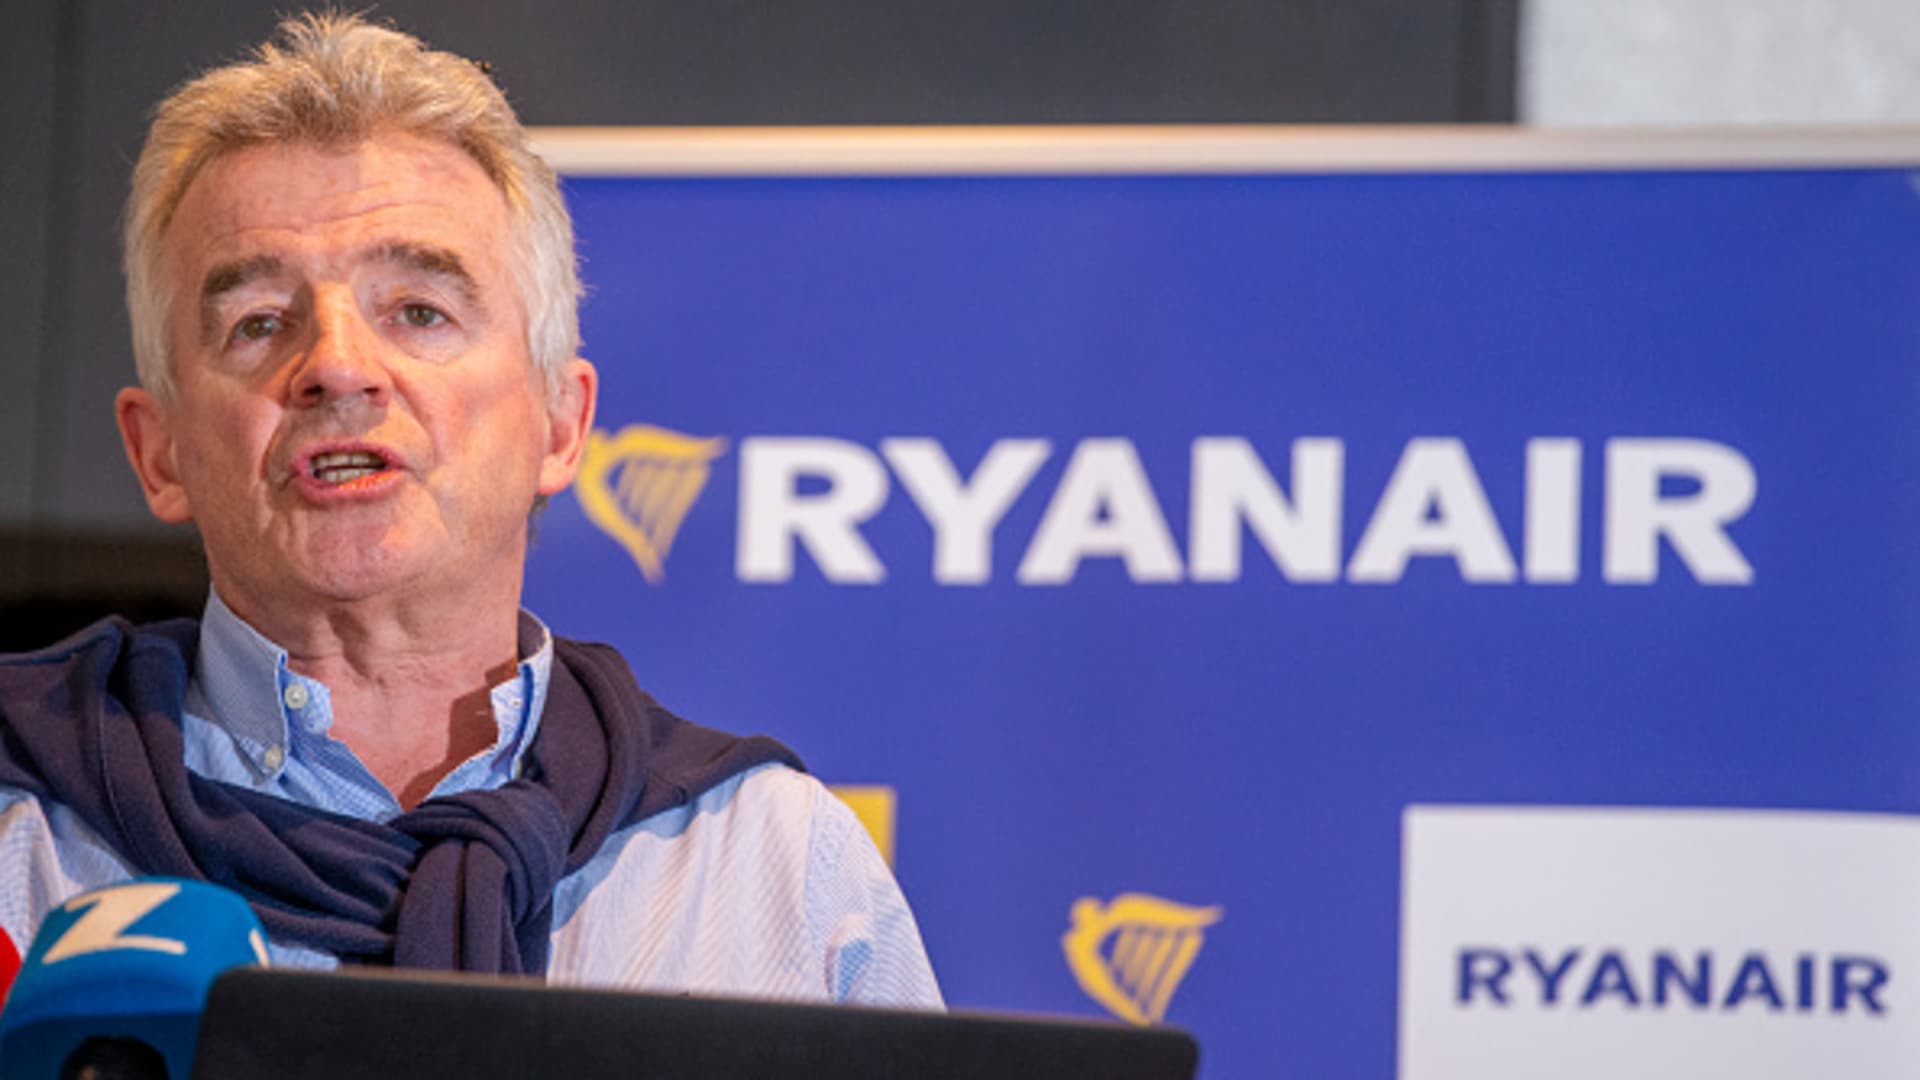 Budget Ryanair says fares must rise